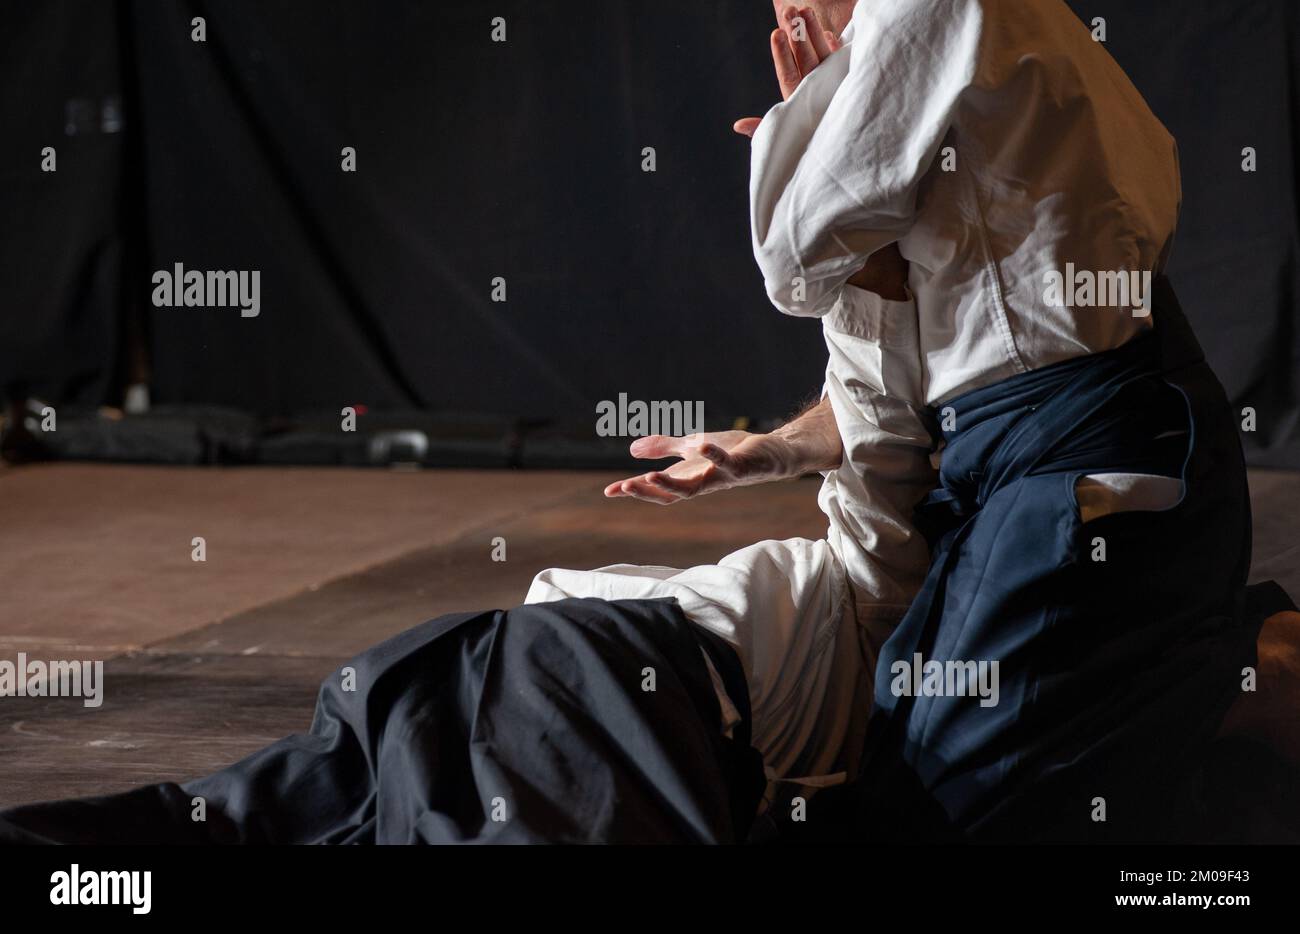 Opponent knockdown and immobilization. Black belt aikido masters during a training session. . Stock Photo